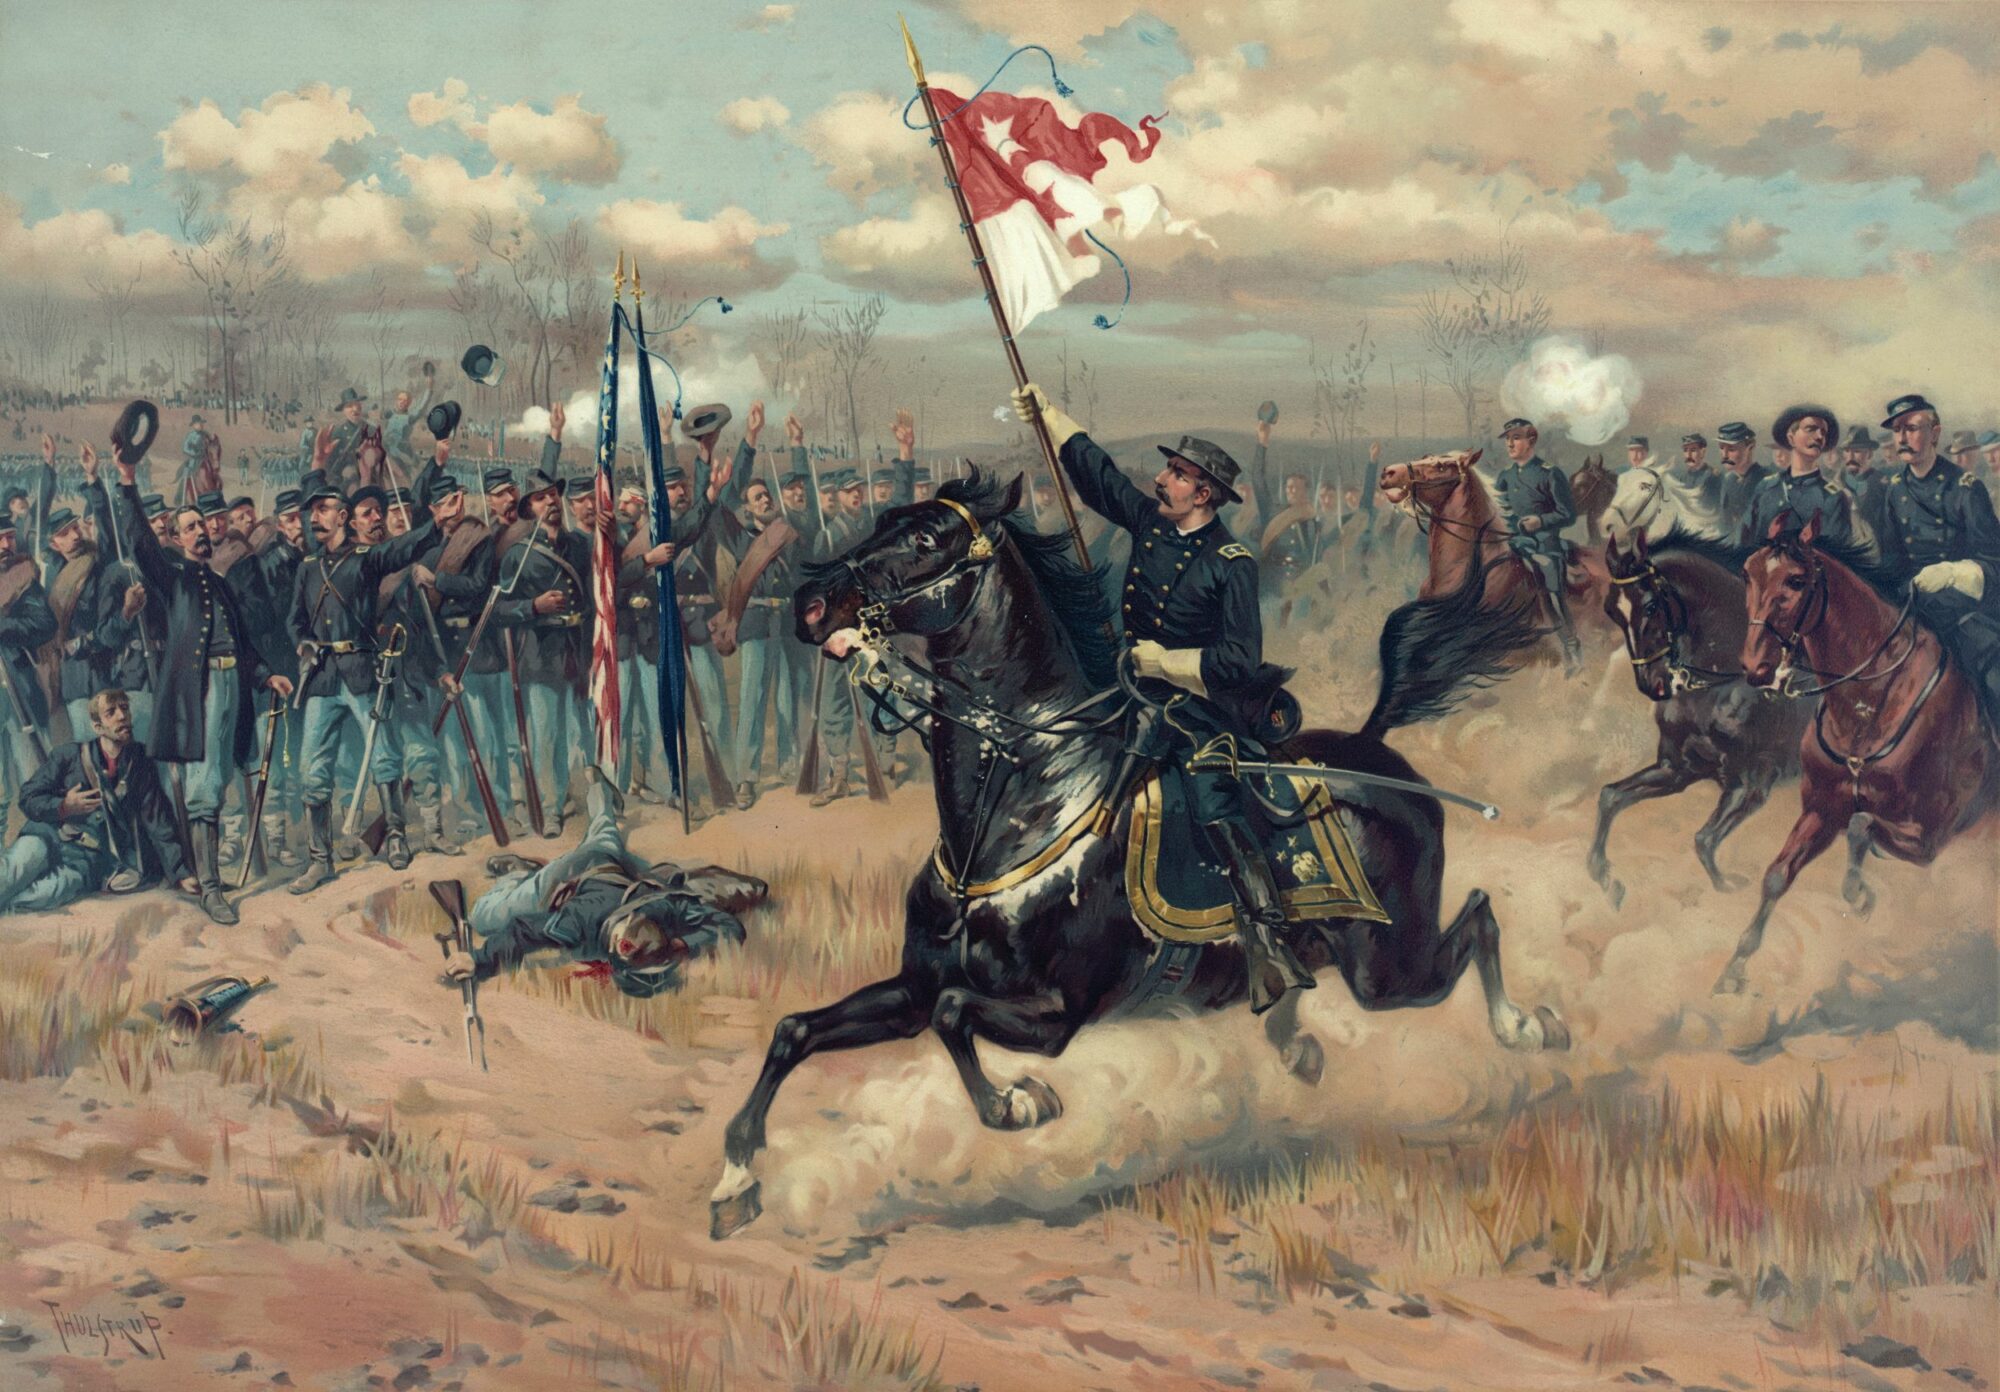 Flourishing his famous red-and-white headquarters flag, Union General Phil Sheridan rides along the front ranks after his dramatic return to the battlefield at Cedar Creek. Painting by Thure de Thulstrup.